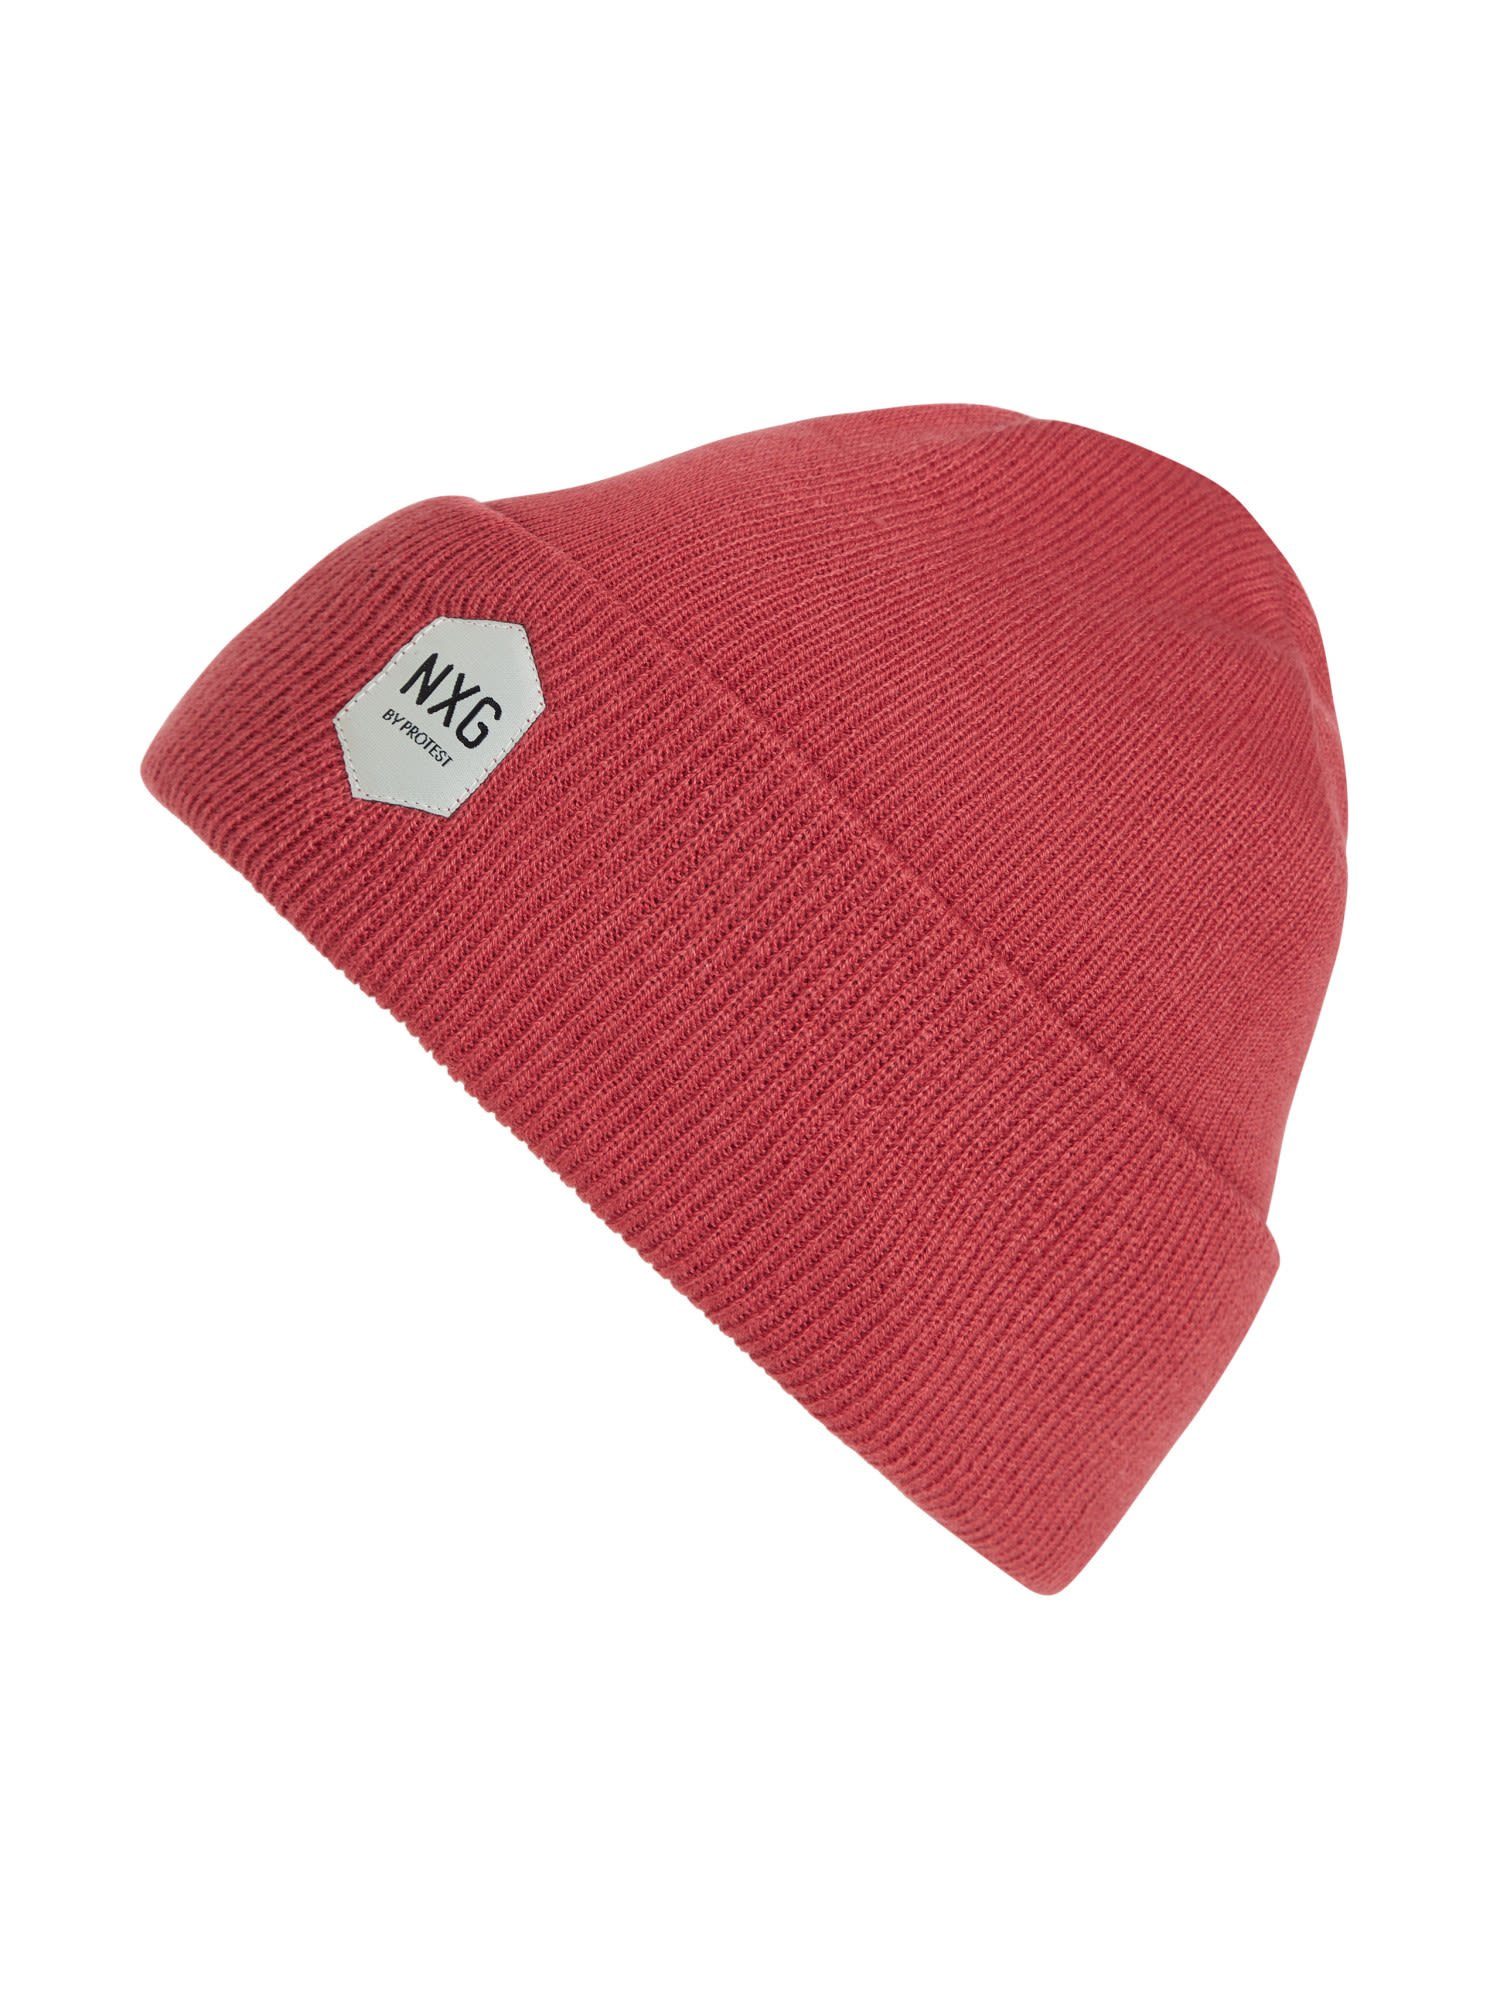 Protest Beanie Protest Nxg Rebelly Beanie Accessoires Rusticrust